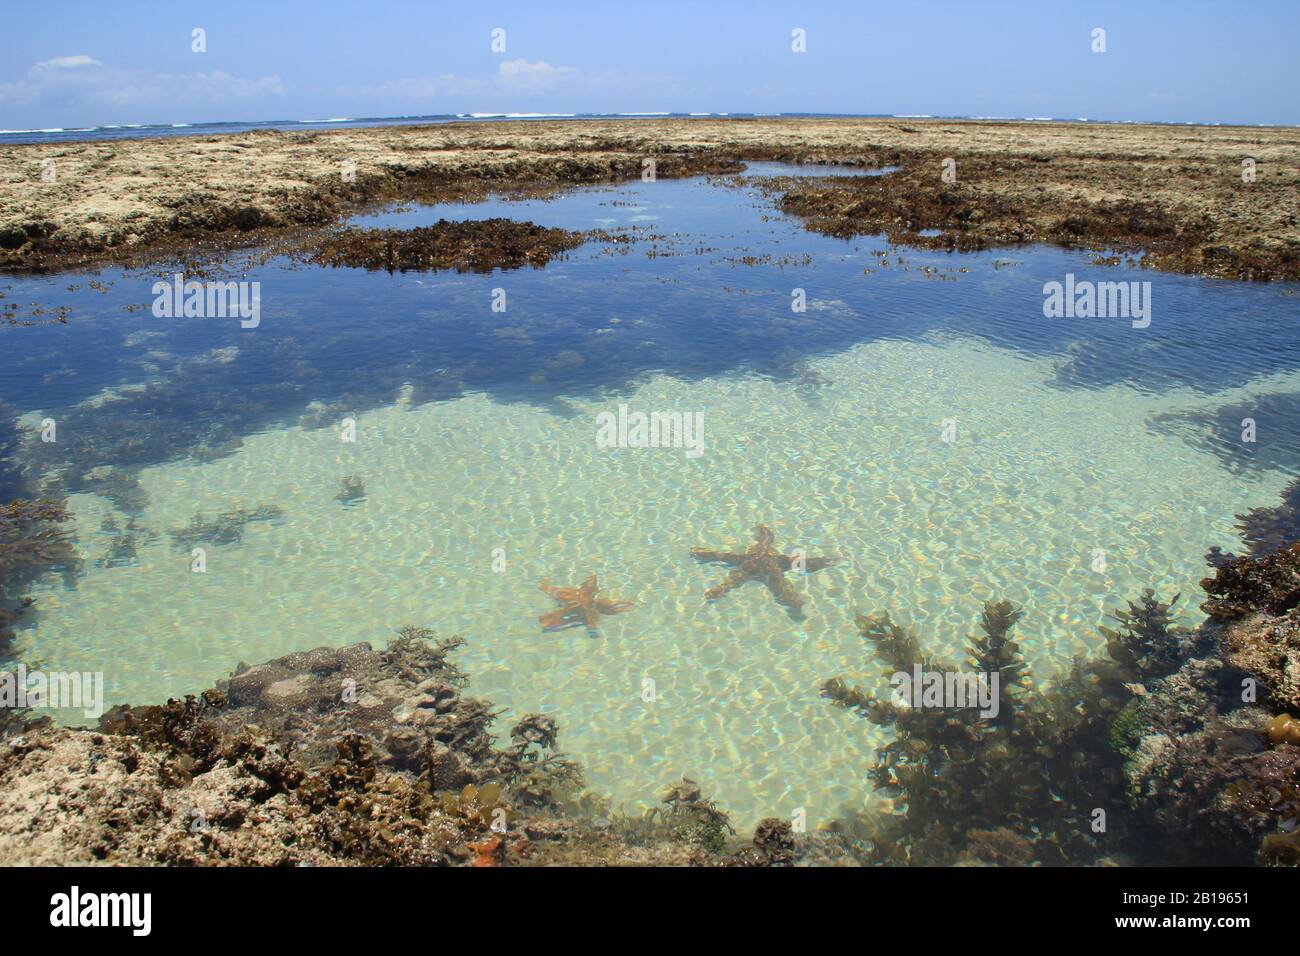 Starfish lie in the turquoise salt water of the Indian Ocean among the coral reefs at low tide Stock Photo